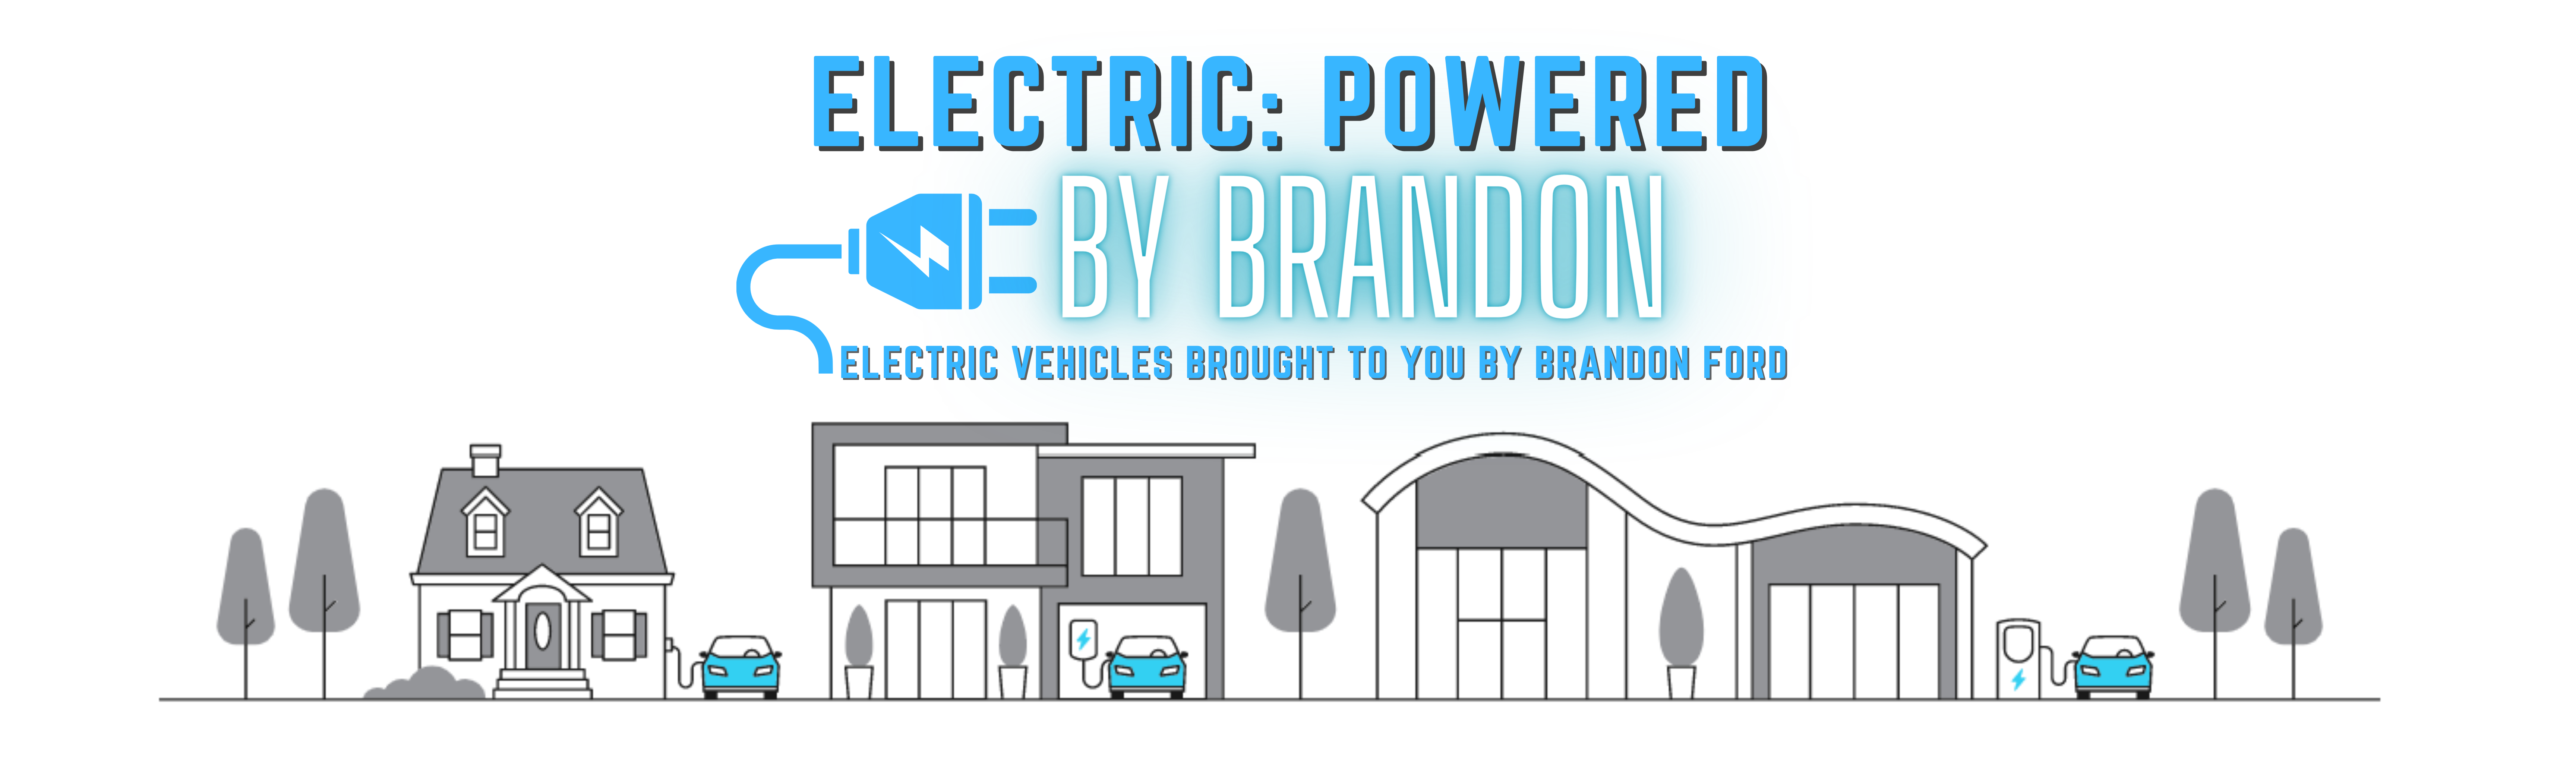 Electric Powered by Brandon; Electric vehicles brought to you by Brandon Ford.